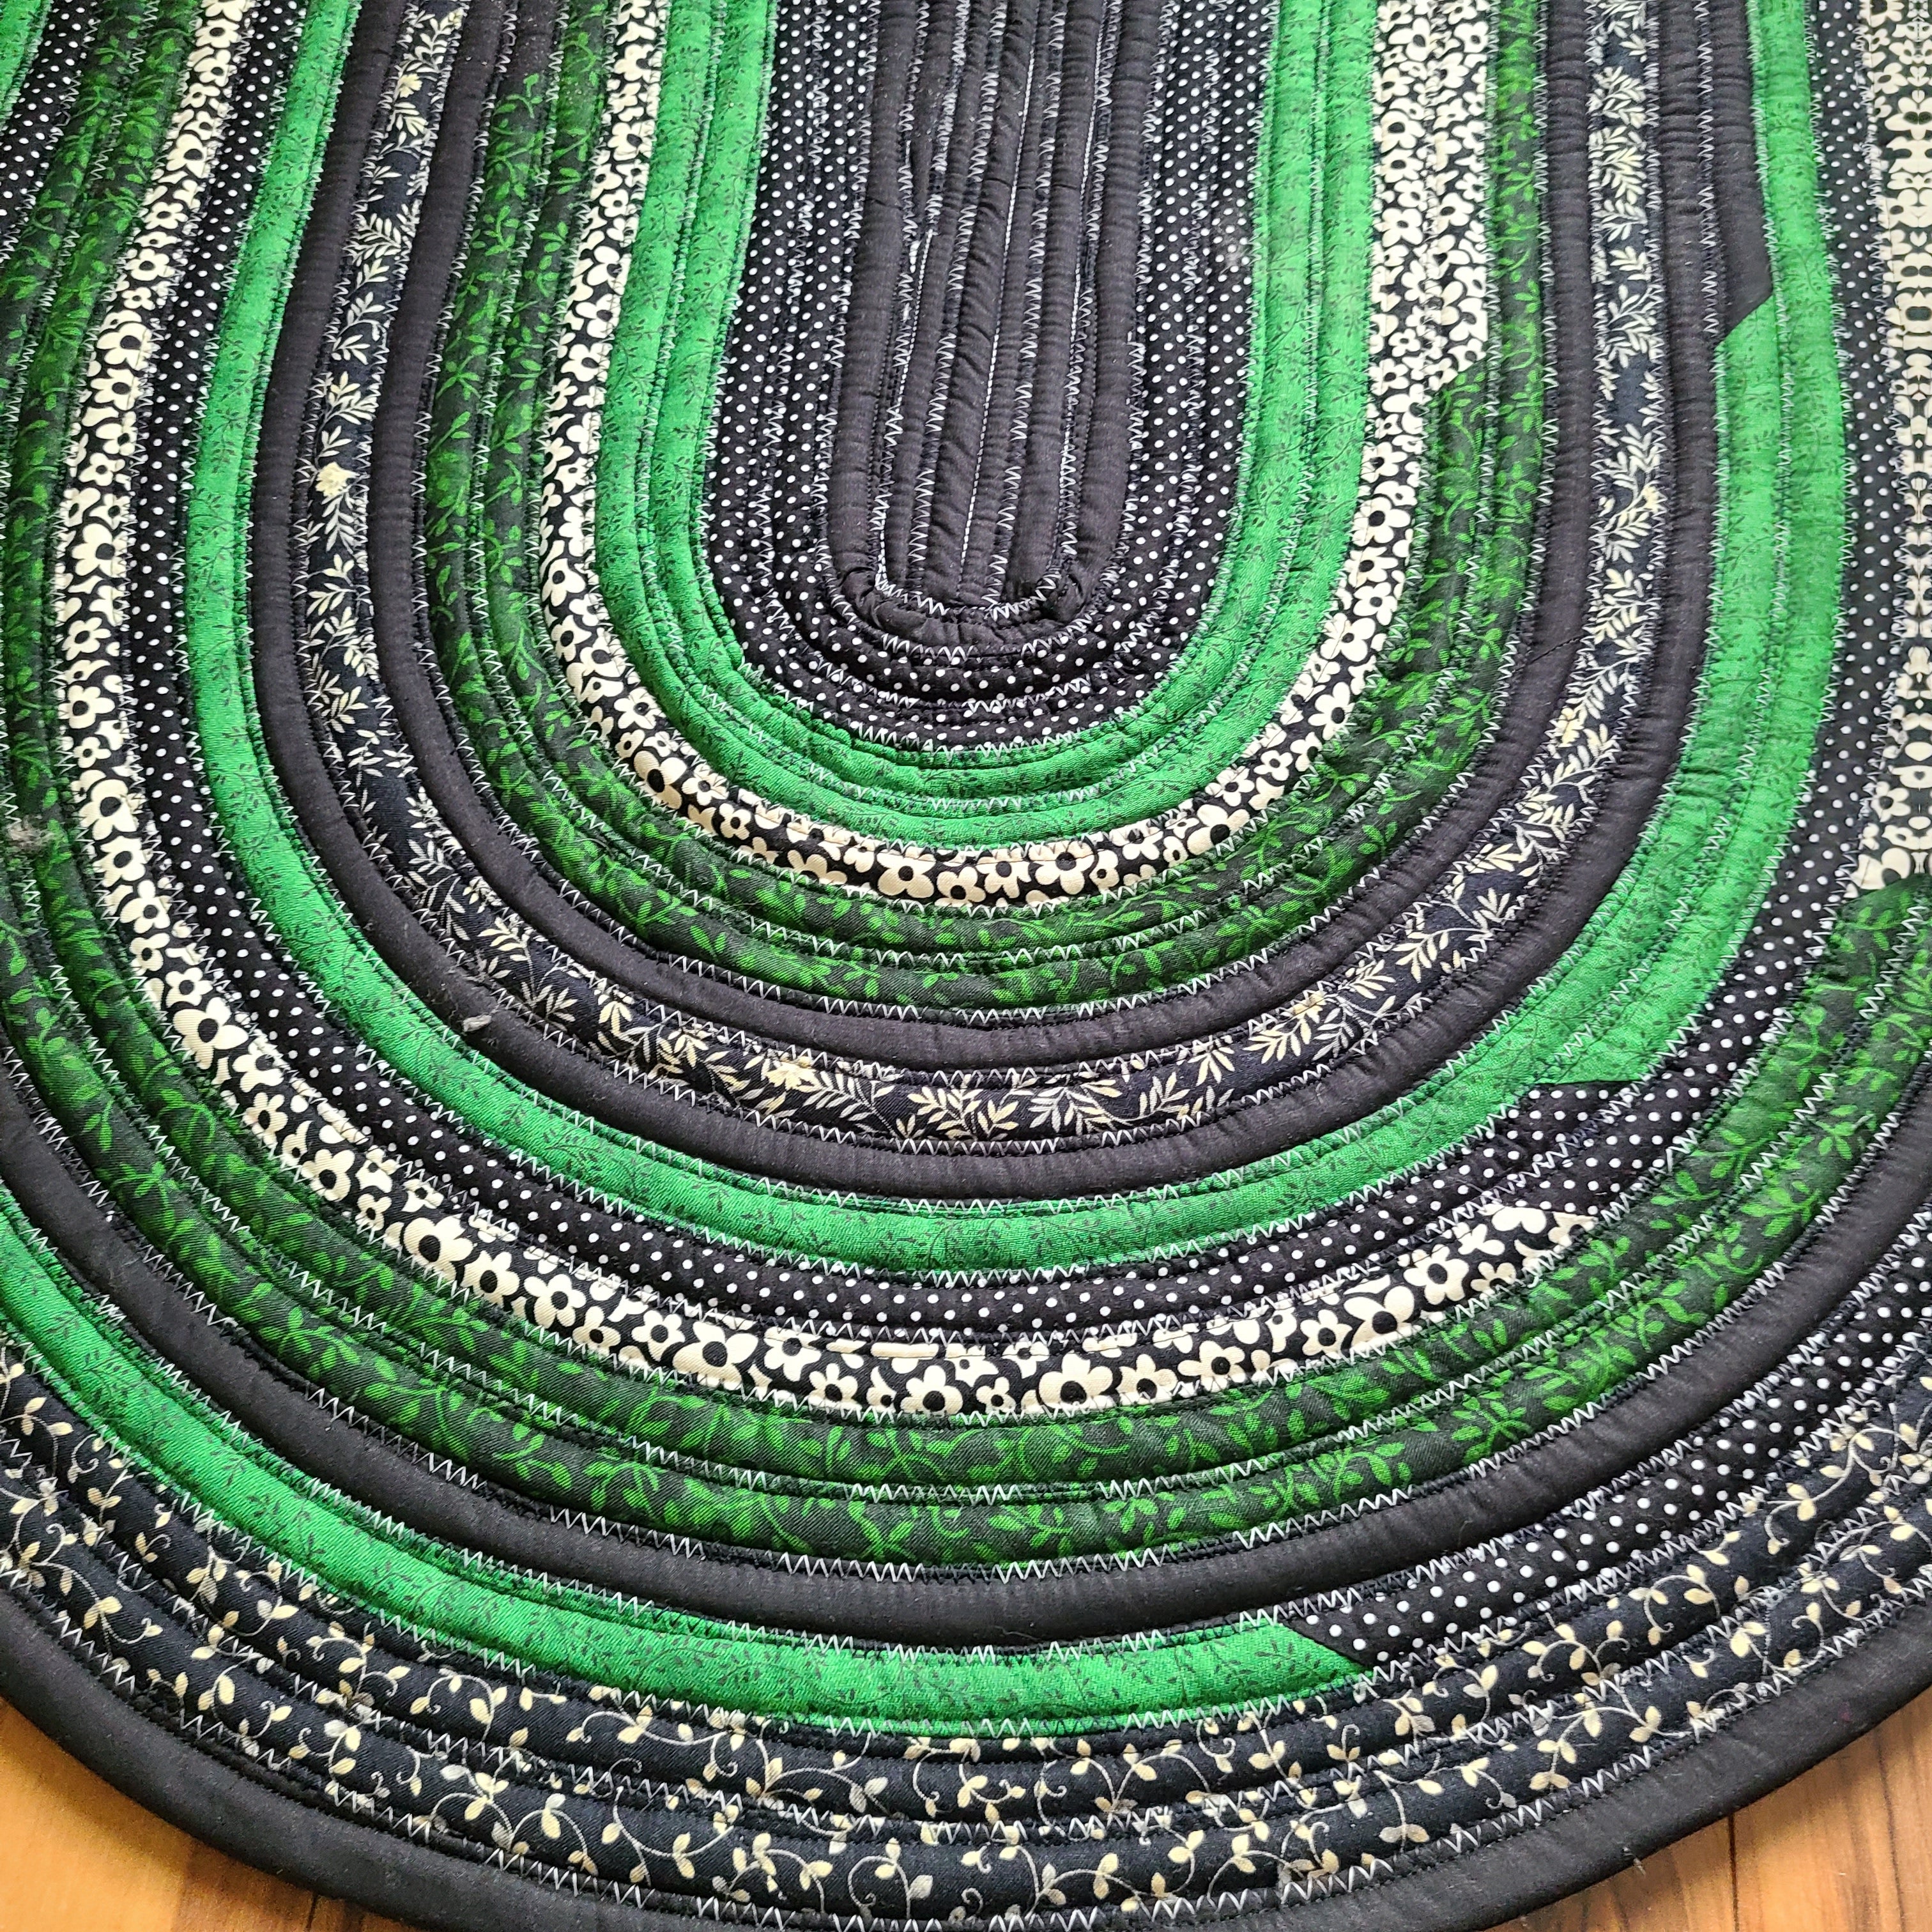 Black and Green Jelly Roll rug